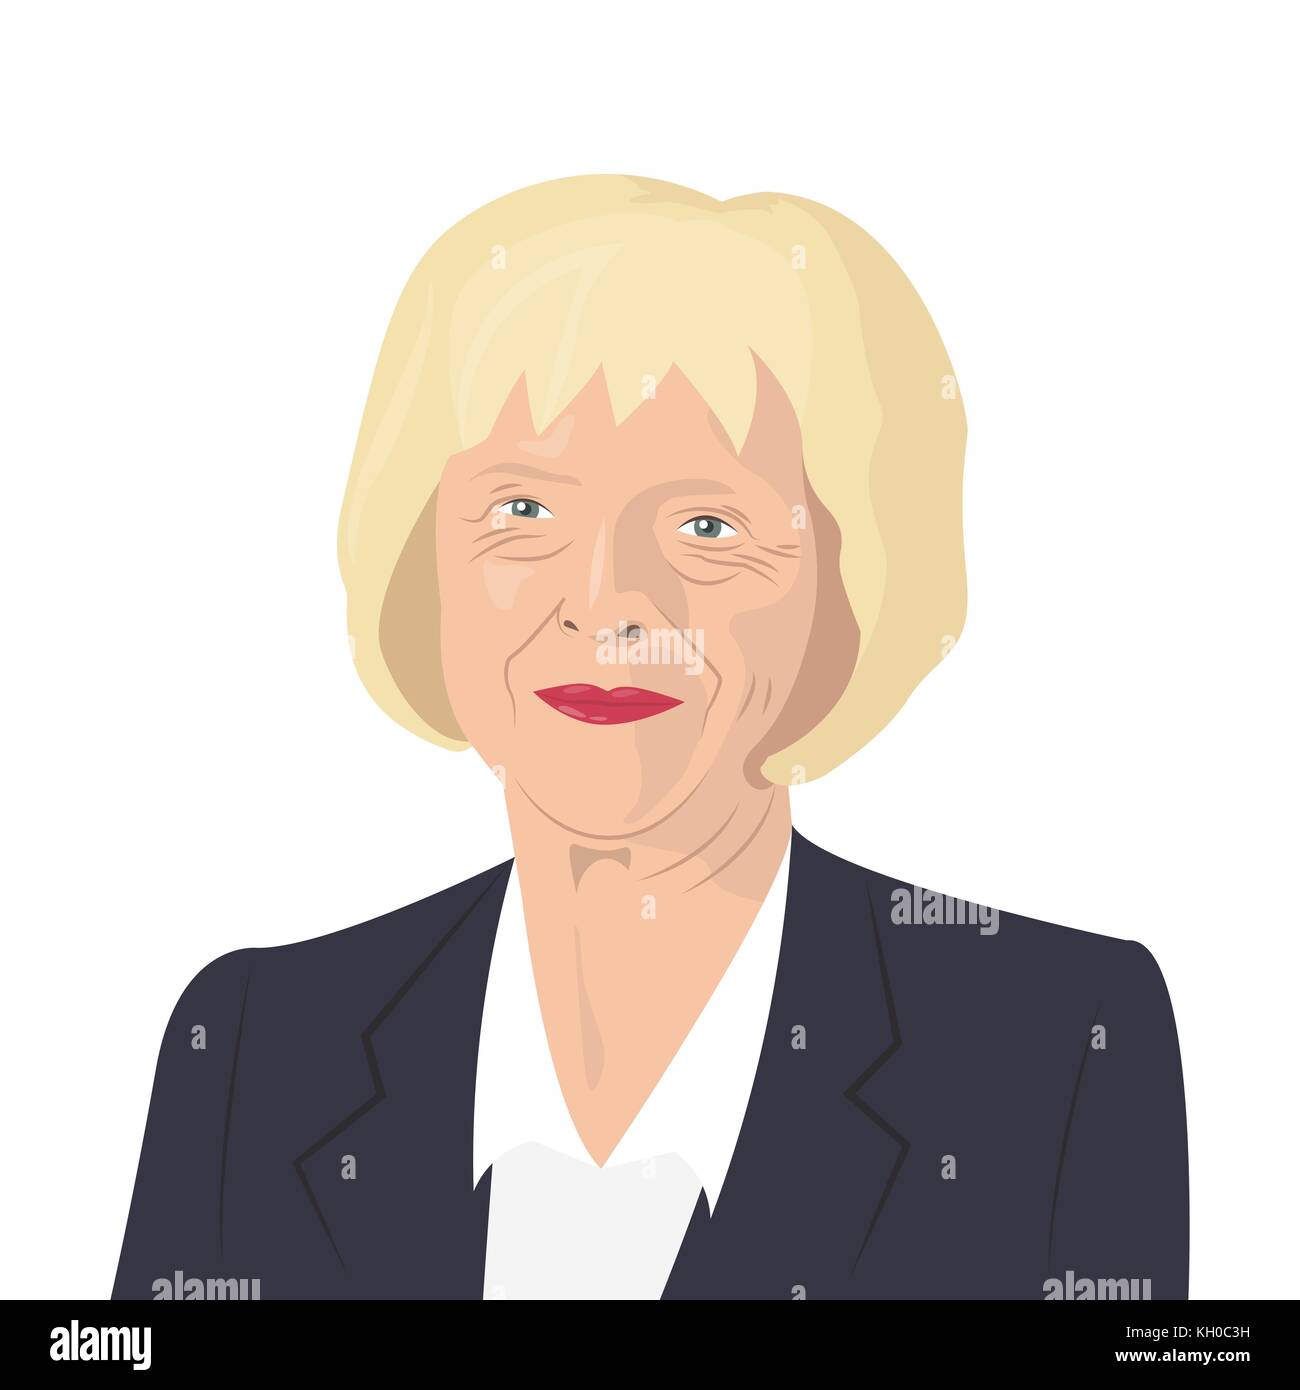 November 11, 2017. Editorial illustration of Theresa May portrait - the Prime Minister of the United Kingdom and the Leader of the Conservative Party  Stock Vector